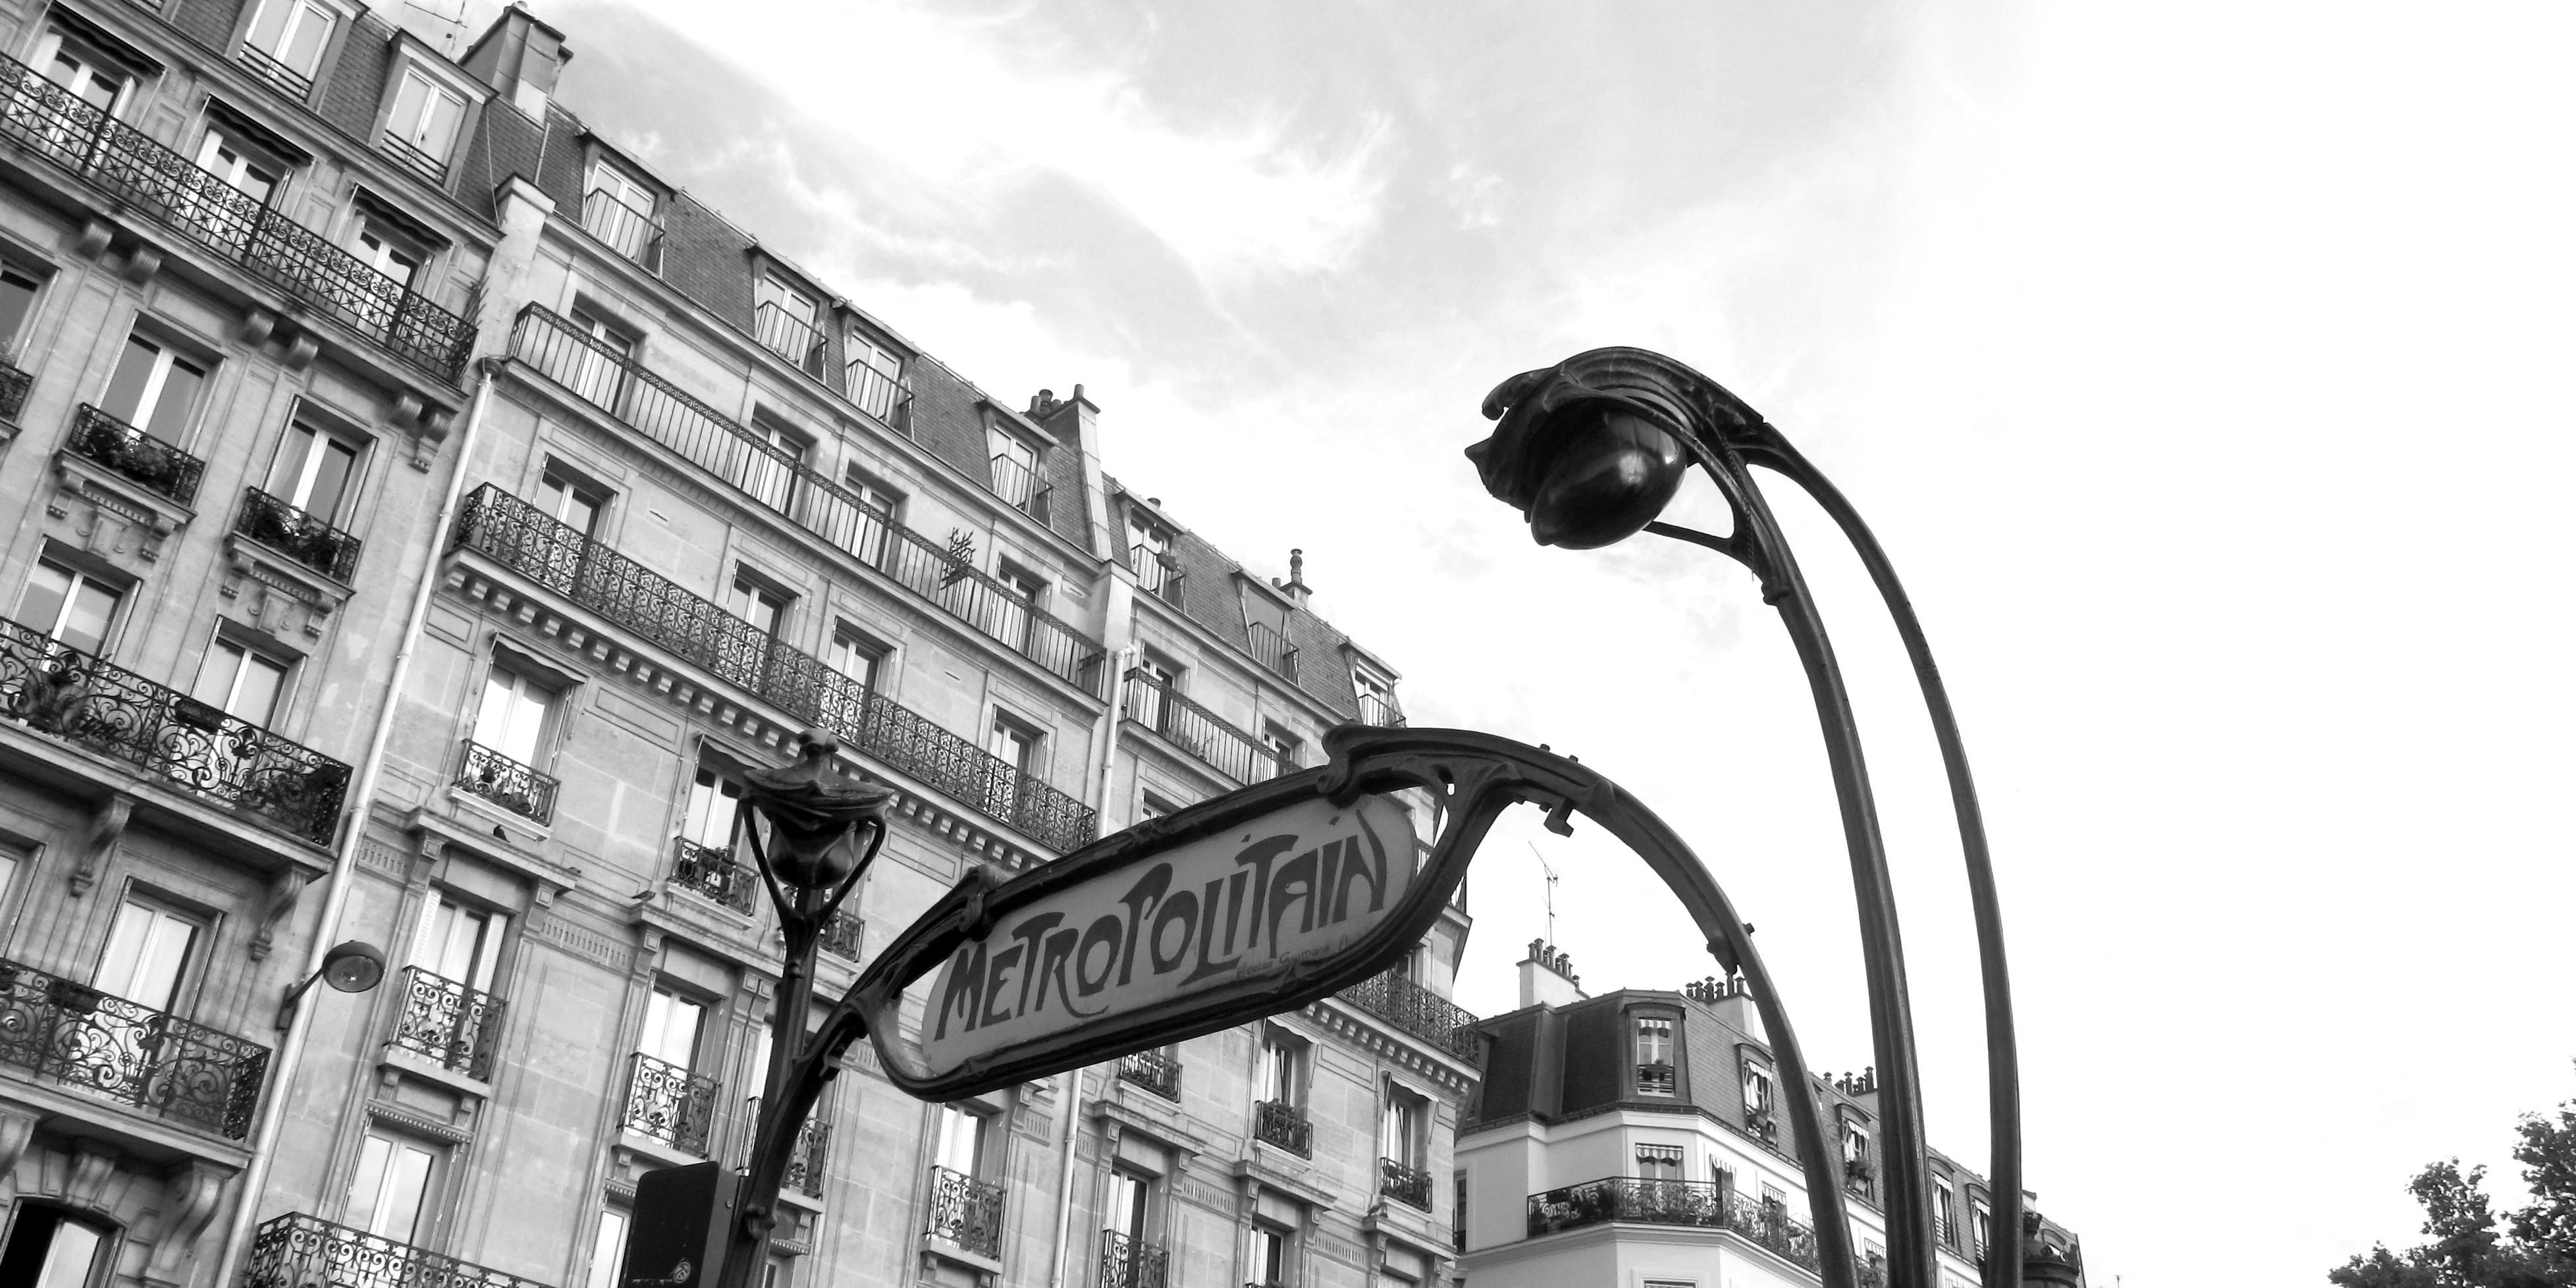 Take advantage of the “Porte de Clichy” metro station located just 300 meters from the hotel and let yourself be tempted by a beautiful Parisian journey. 5 minutes by metro and you will be at Saint Lazare station, a few steps from Printemps Haussmann, Opéra Garnier, Moulin Rouge and Montmartre.